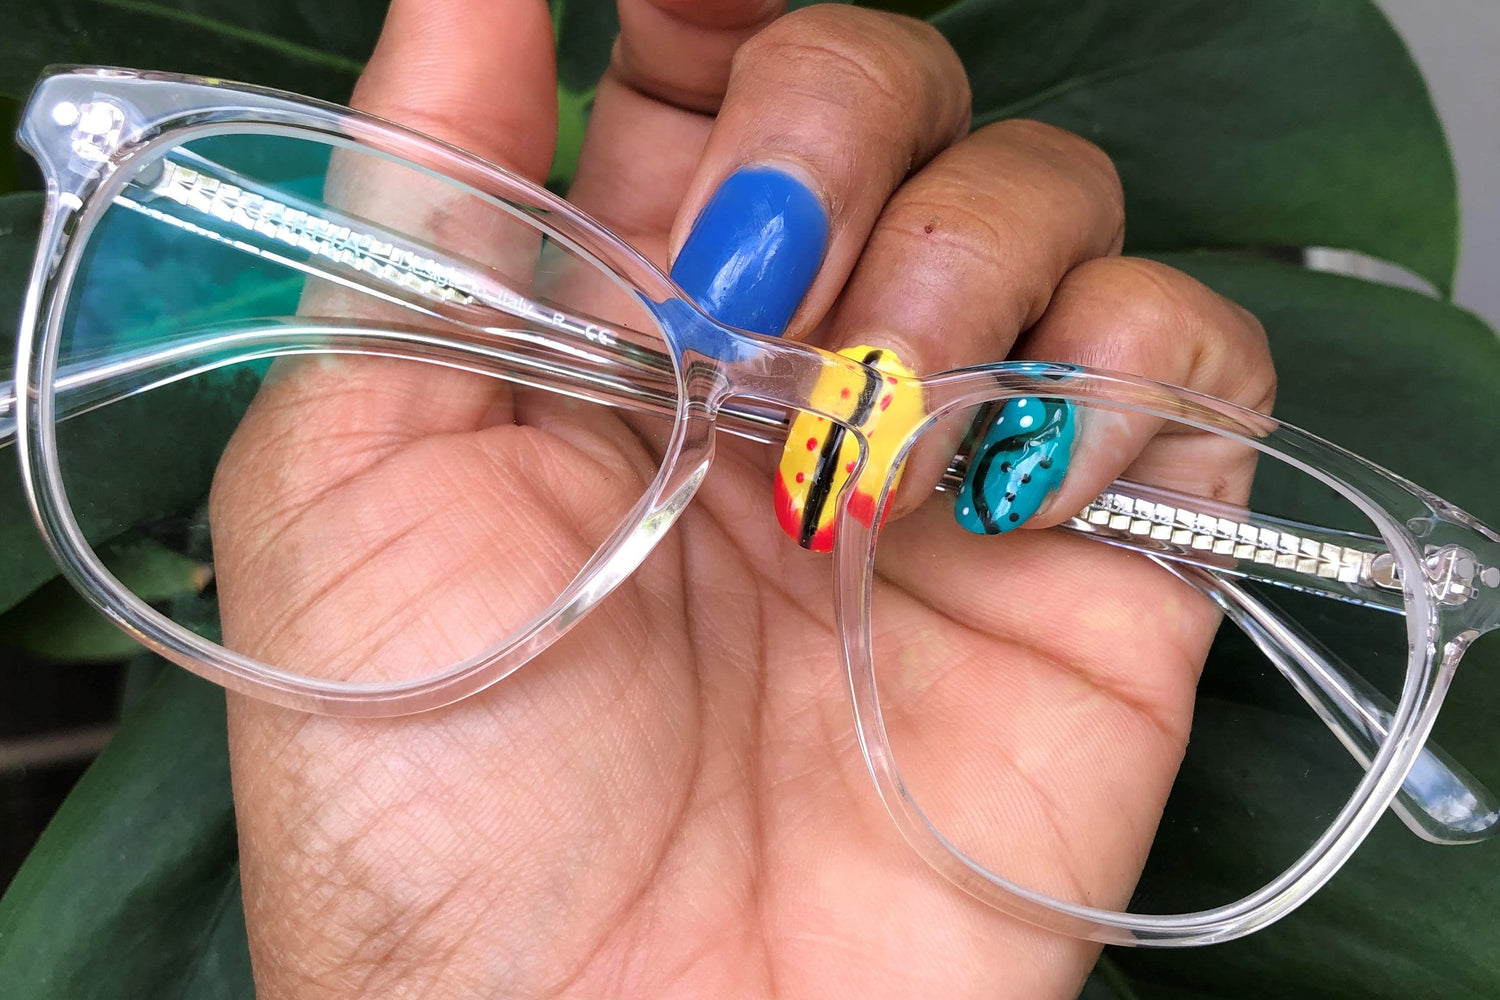 How Can I Fix My Glasses Without A Screwdriver? | KOALAEYE OPTICAL